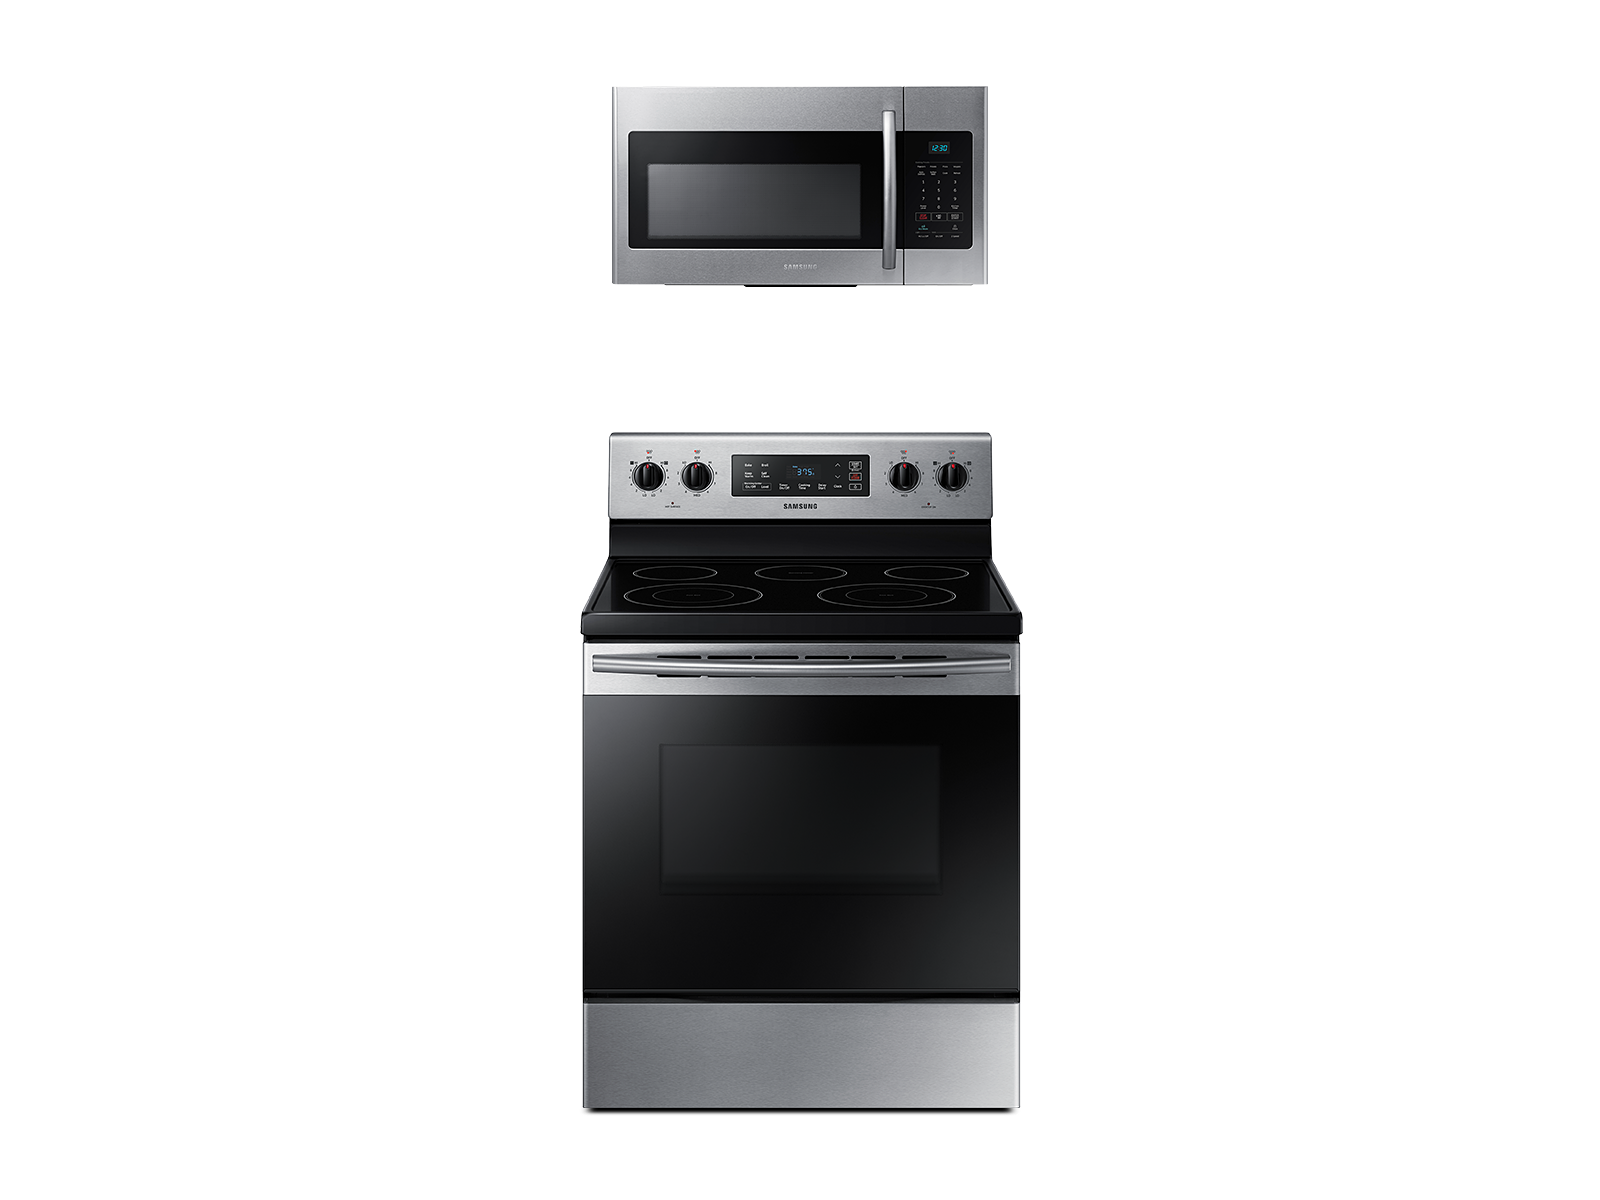 Samsung Freestanding Electric Range + Over-the-Range Microwave in Stainless Steel(BNDL-1646291346134)